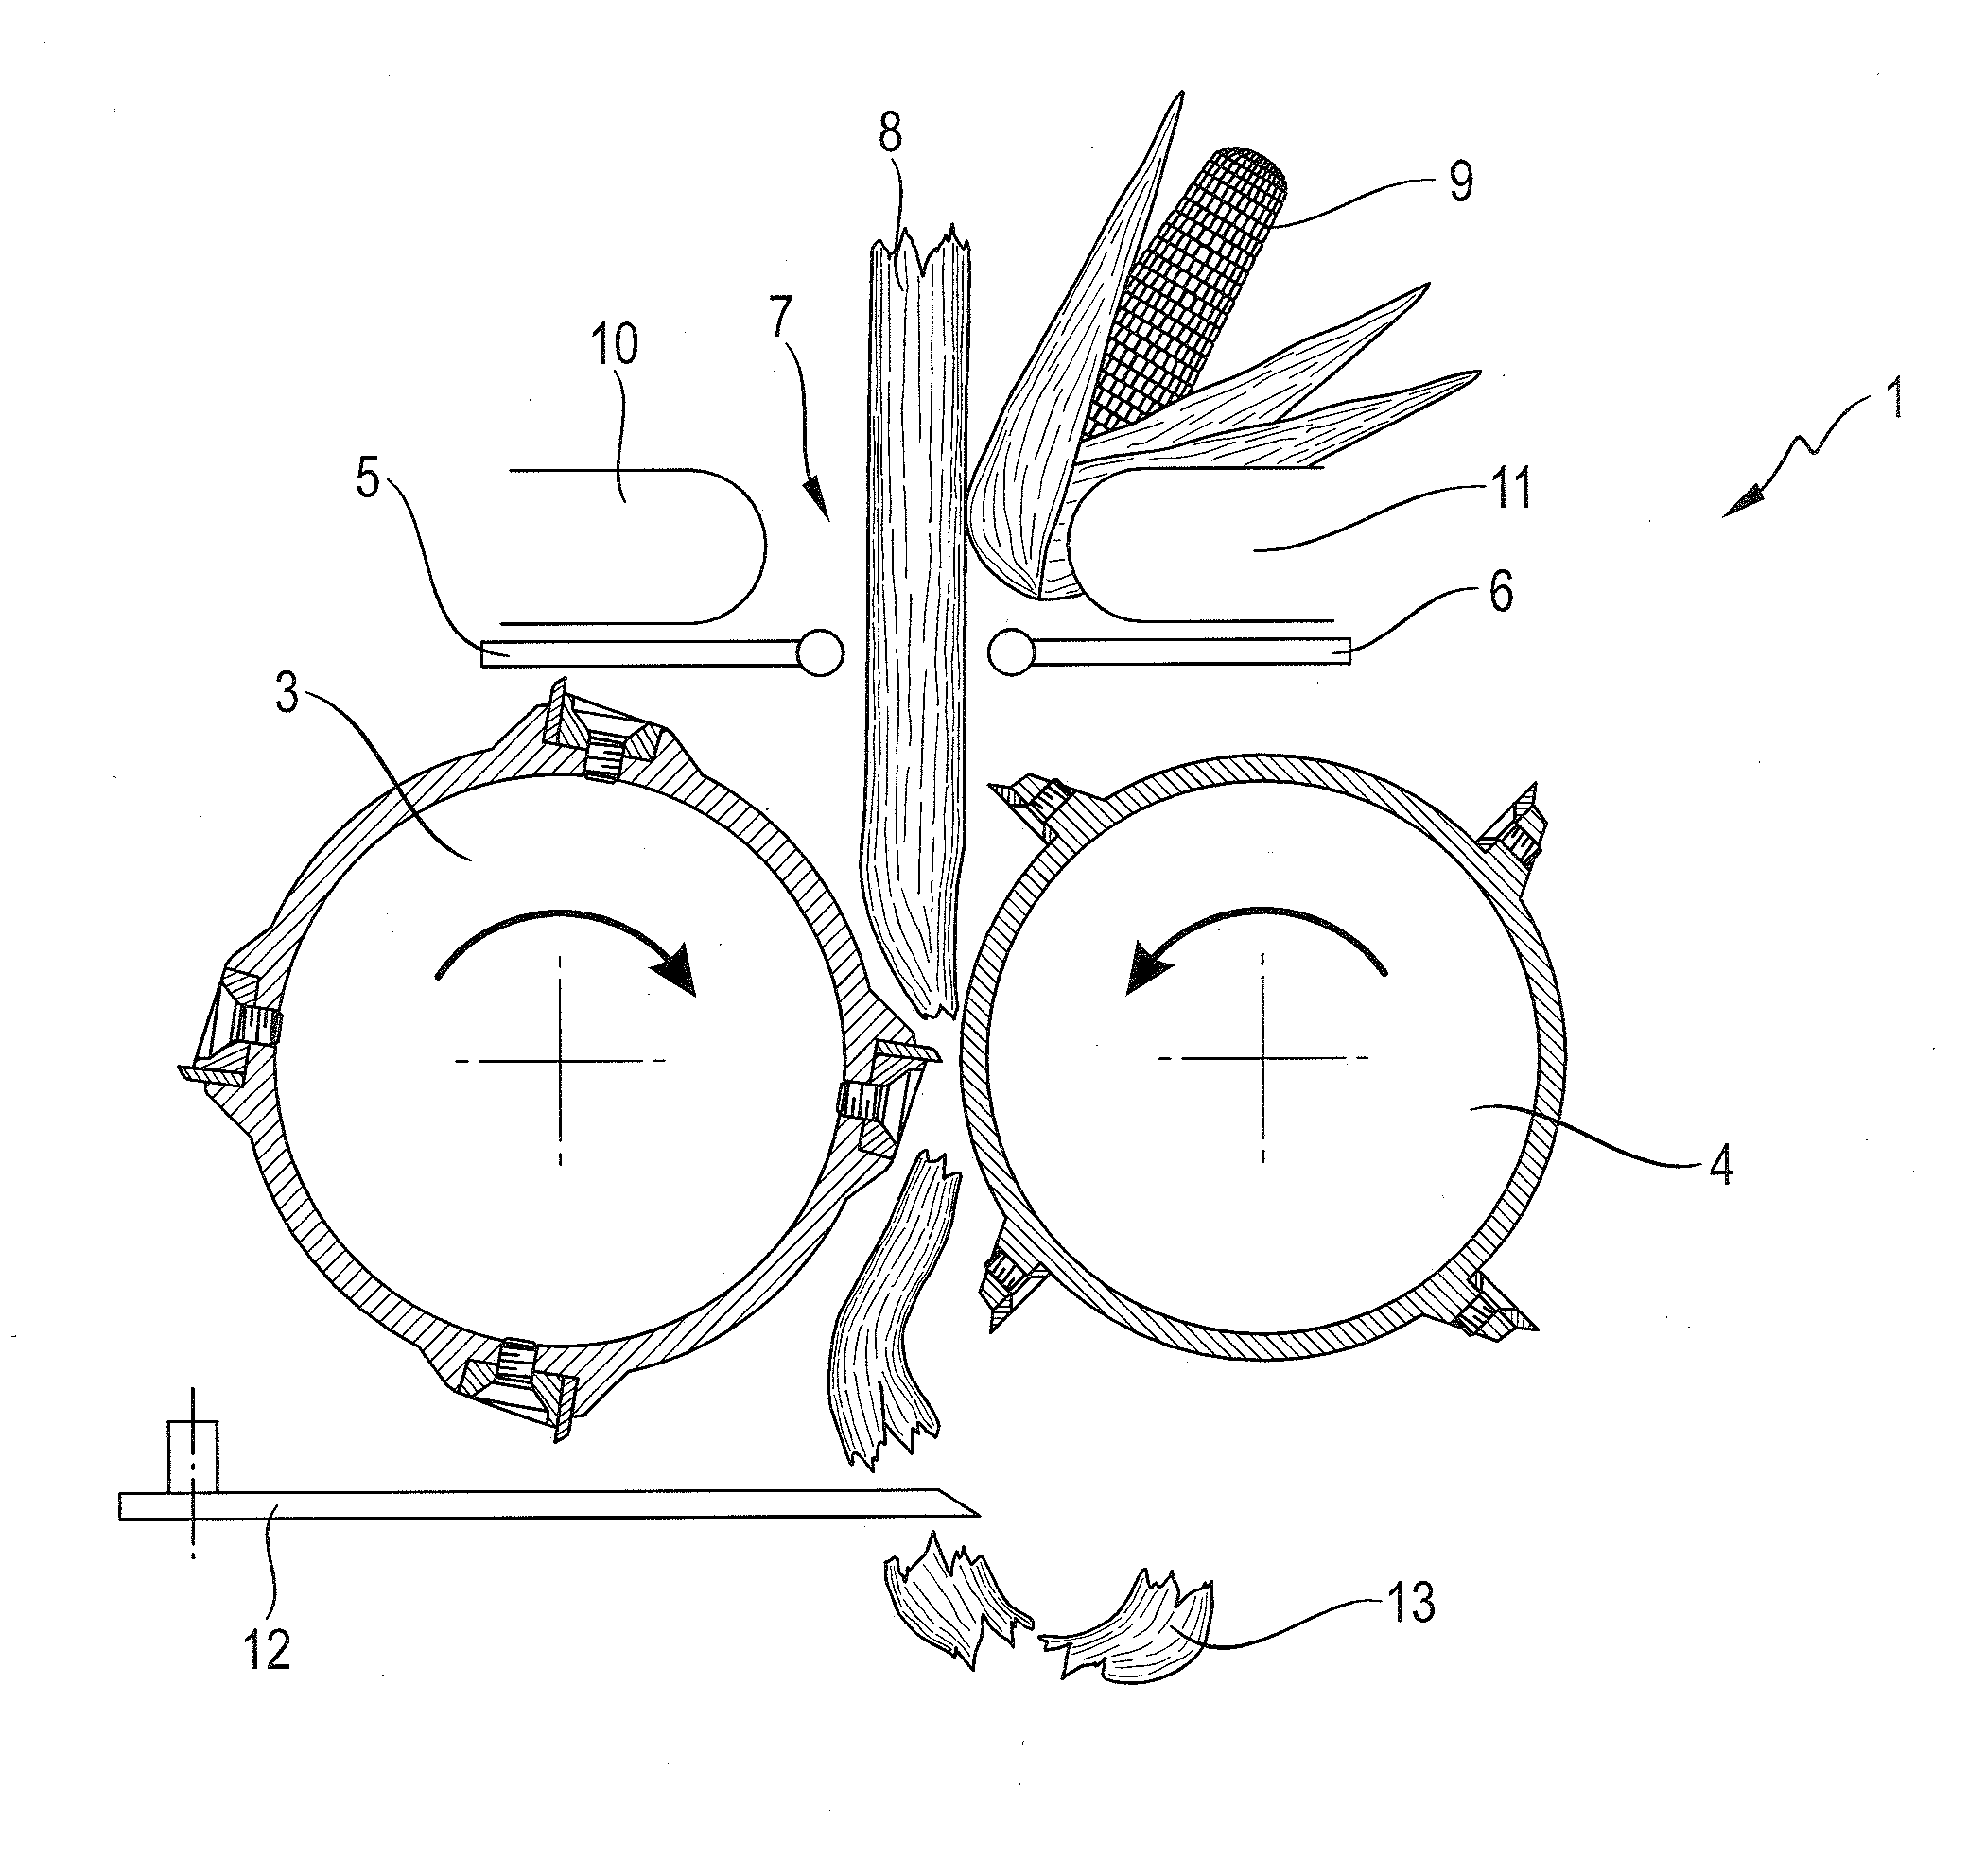 Method for operating a snapping unit having stripper plates with variable spacing